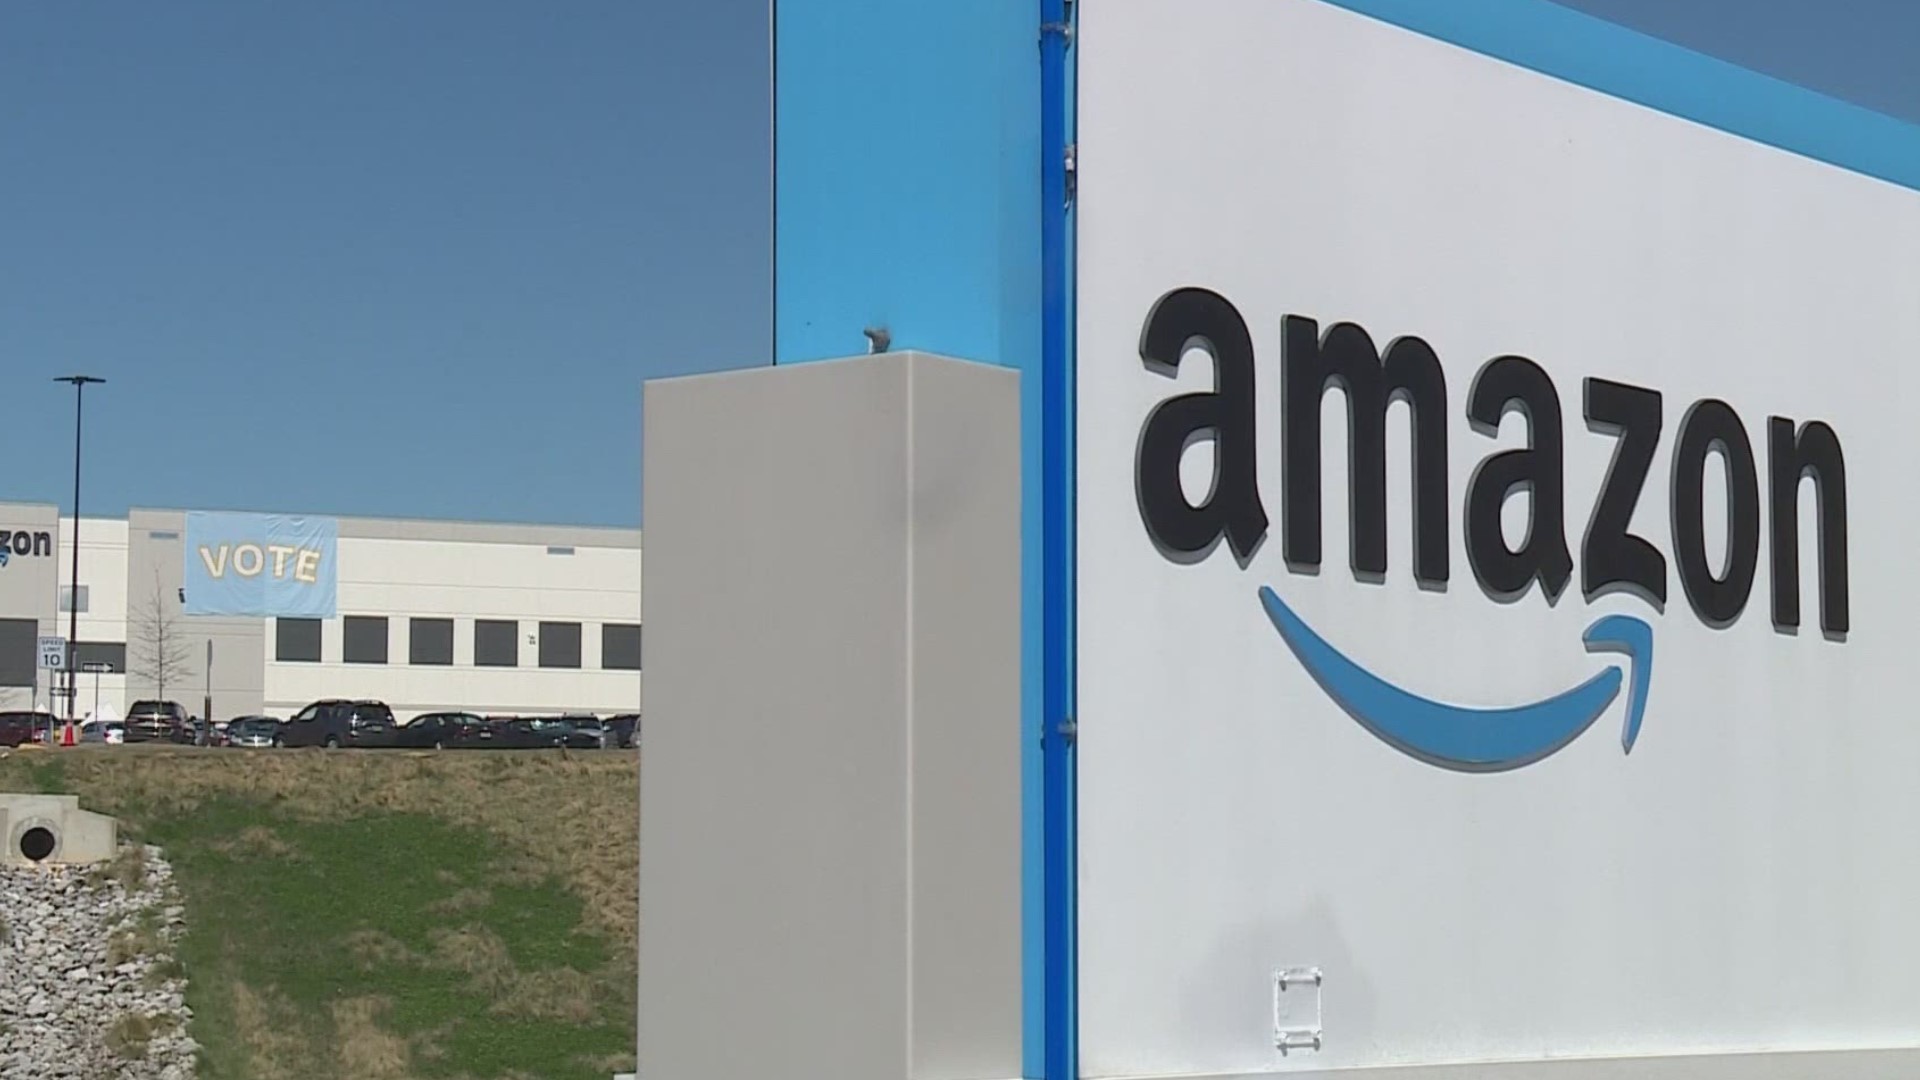 If they decide to form a union, it would be the first in Amazon's history. The tally of the mail-in ballots is expected to take several days.